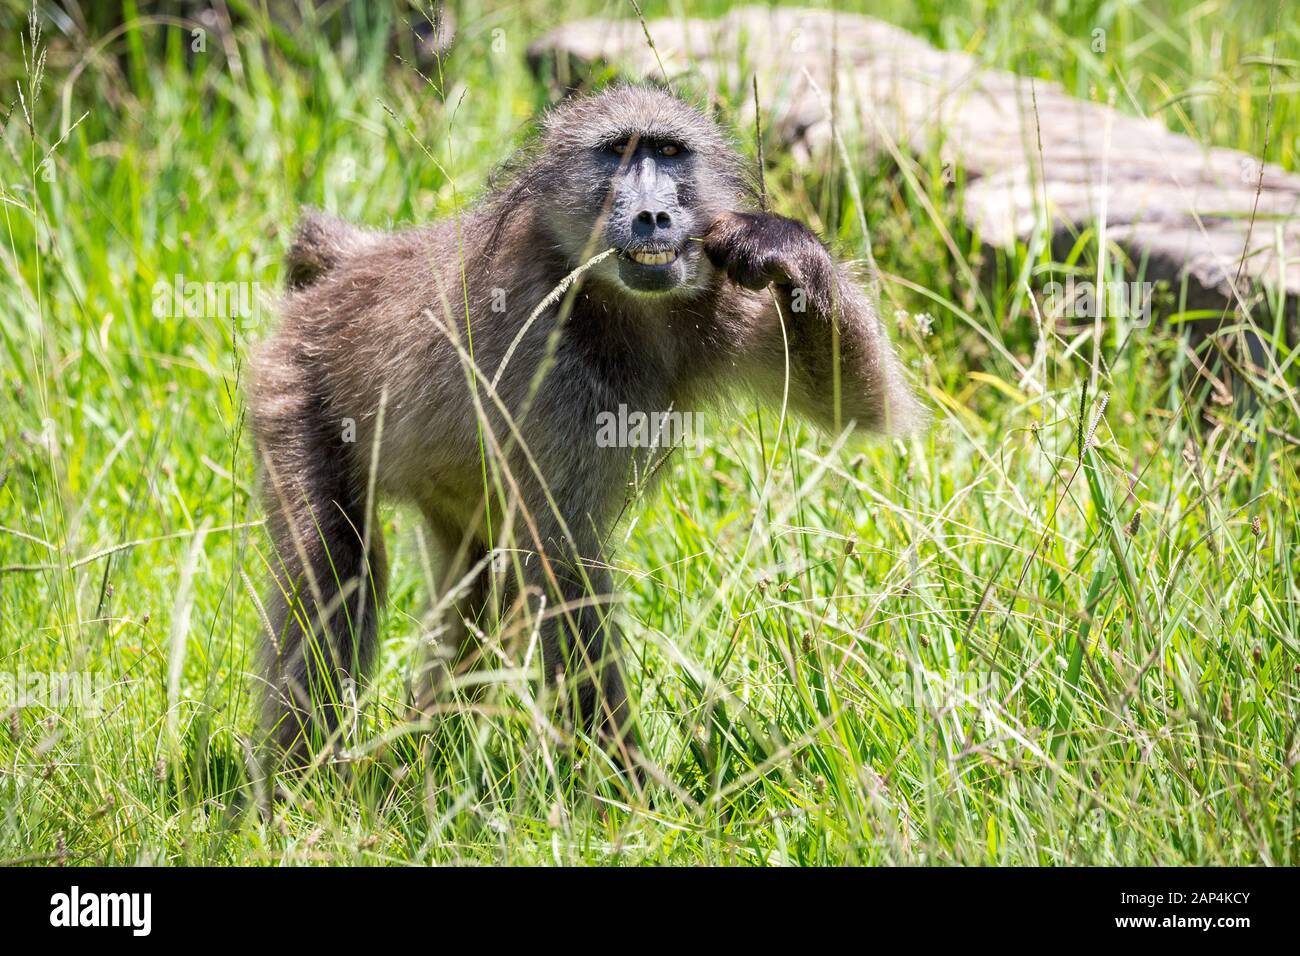 Baboon grabbing a blade of grass with it's hand and eating the upper part of it, South Africa Stock Photo